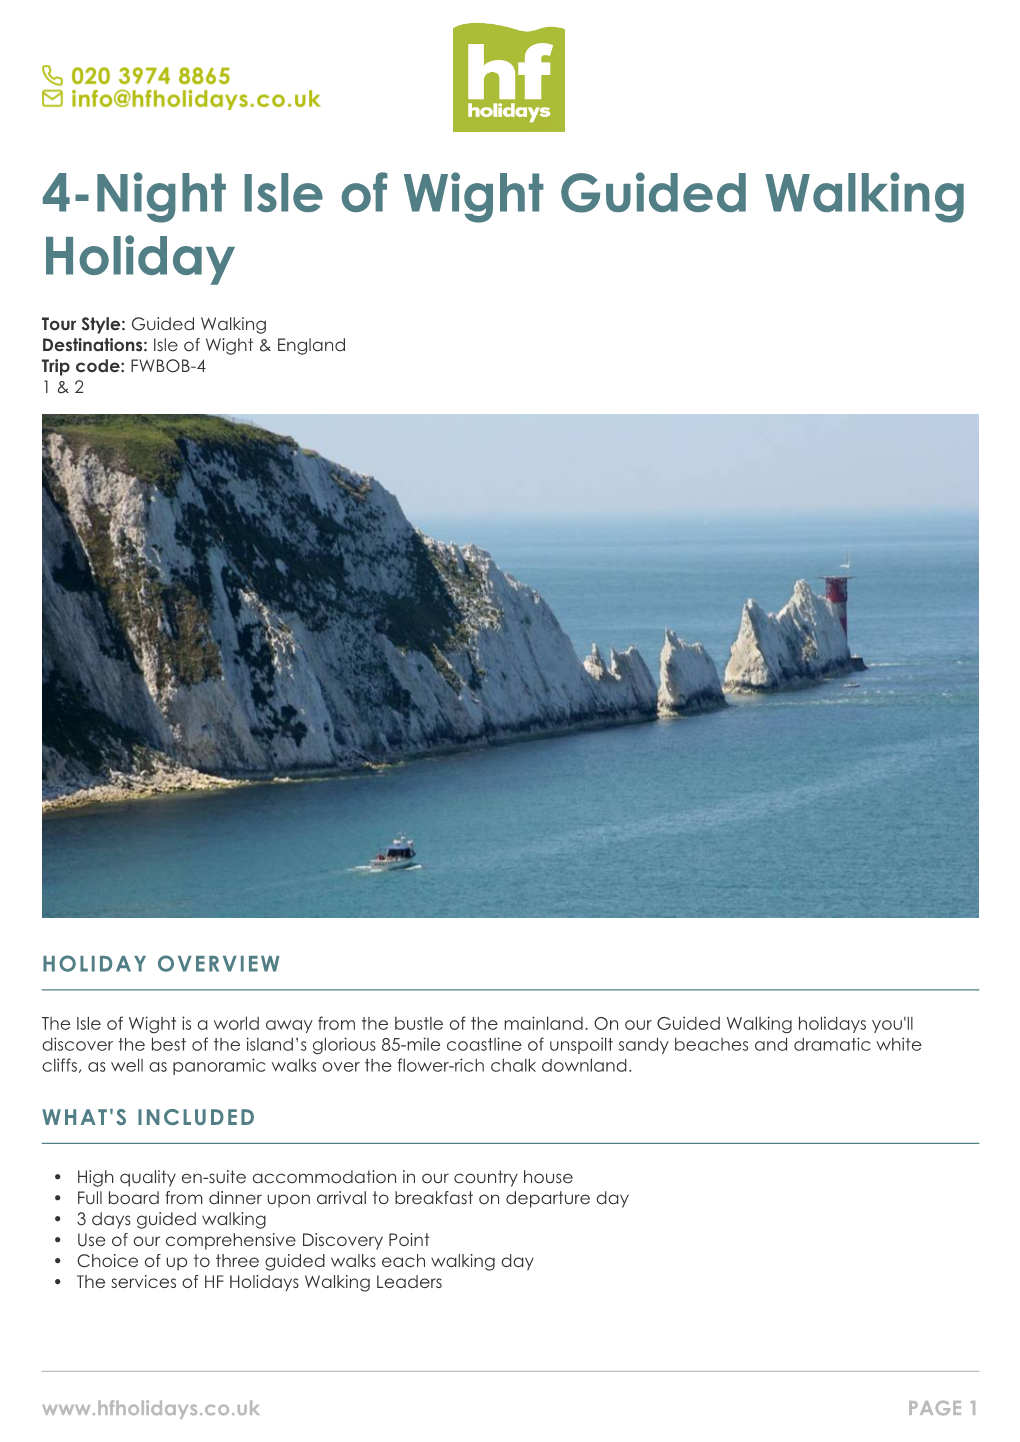 4-Night Isle of Wight Guided Walking Holiday